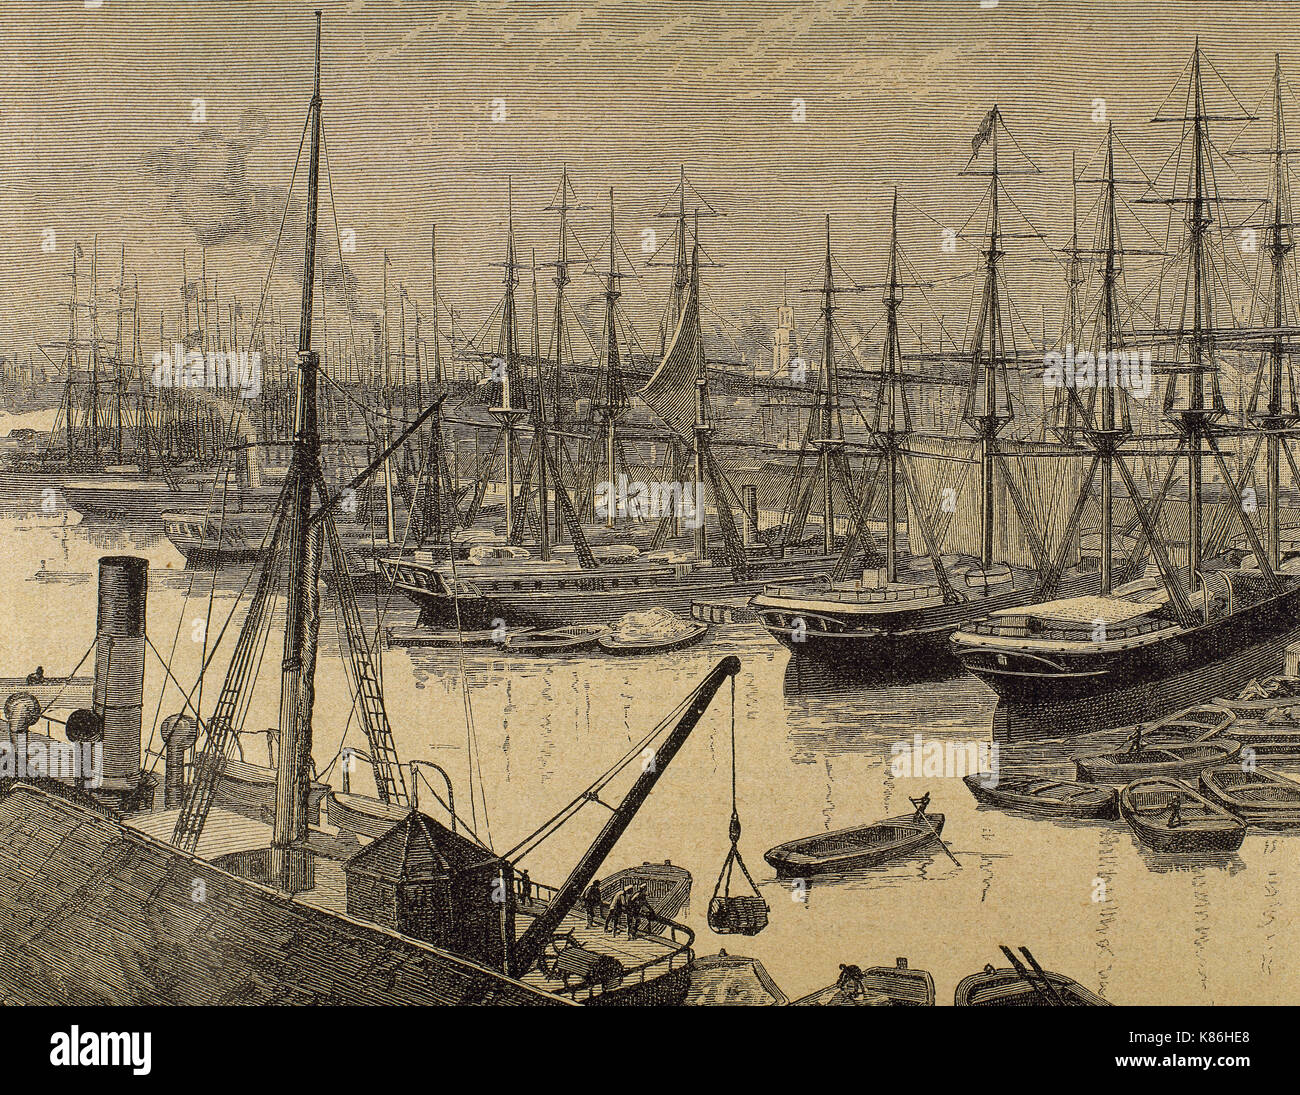 England. London. Dock of The East India Company (EIC). English and later British joint-stock company. Engraving by J.R. Wells. "La Ilustracion Iberica", 1888. Stock Photo